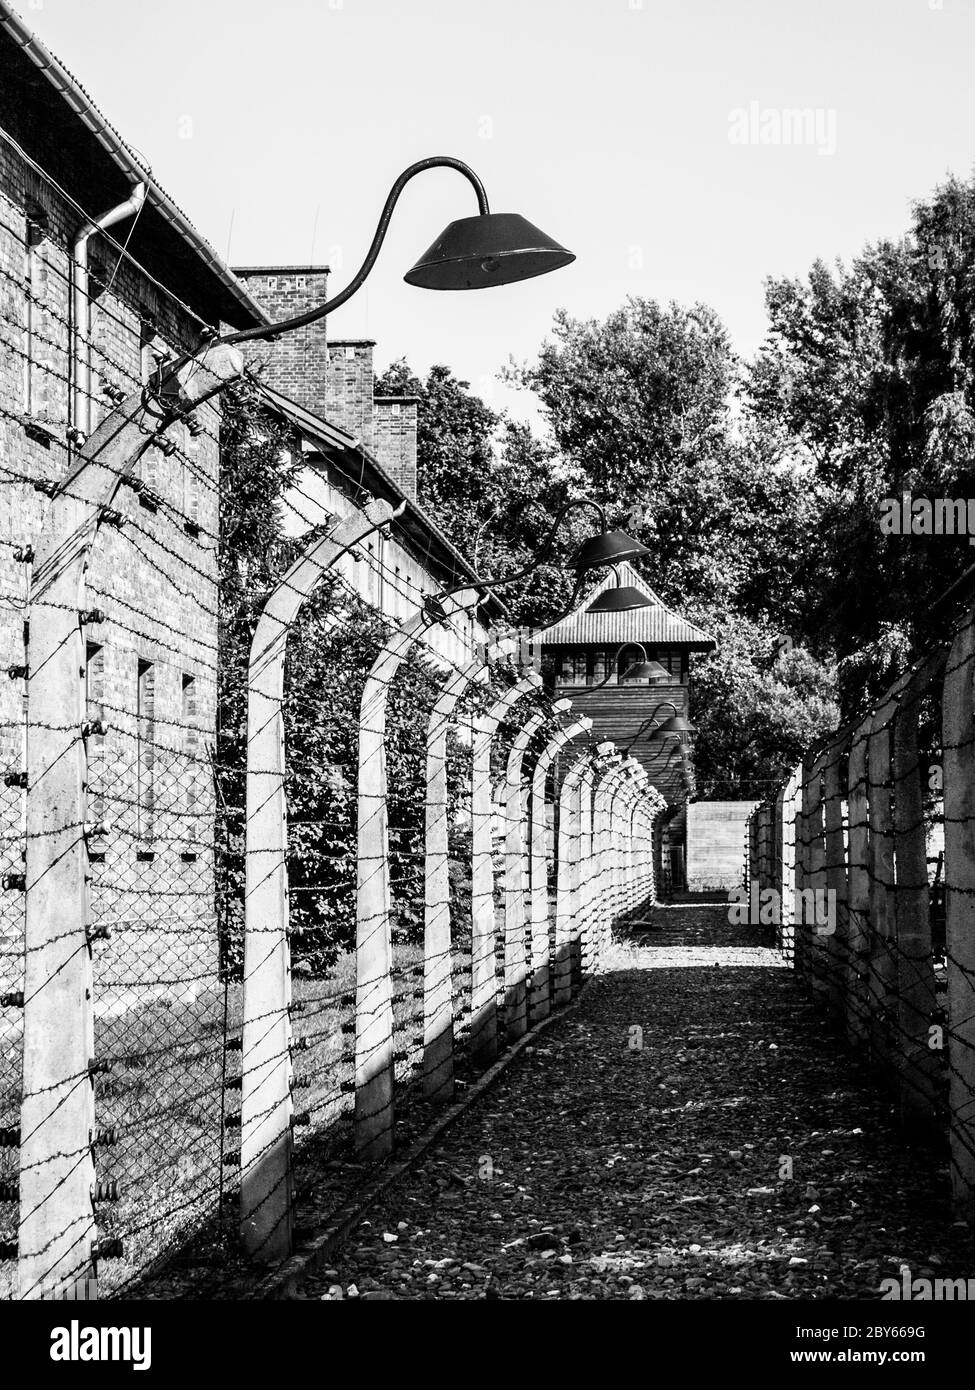 Barb wire fence with guard lamps and tower in concentration camp, Auschwitz, or Oswiecim, Poland. Stock Photo